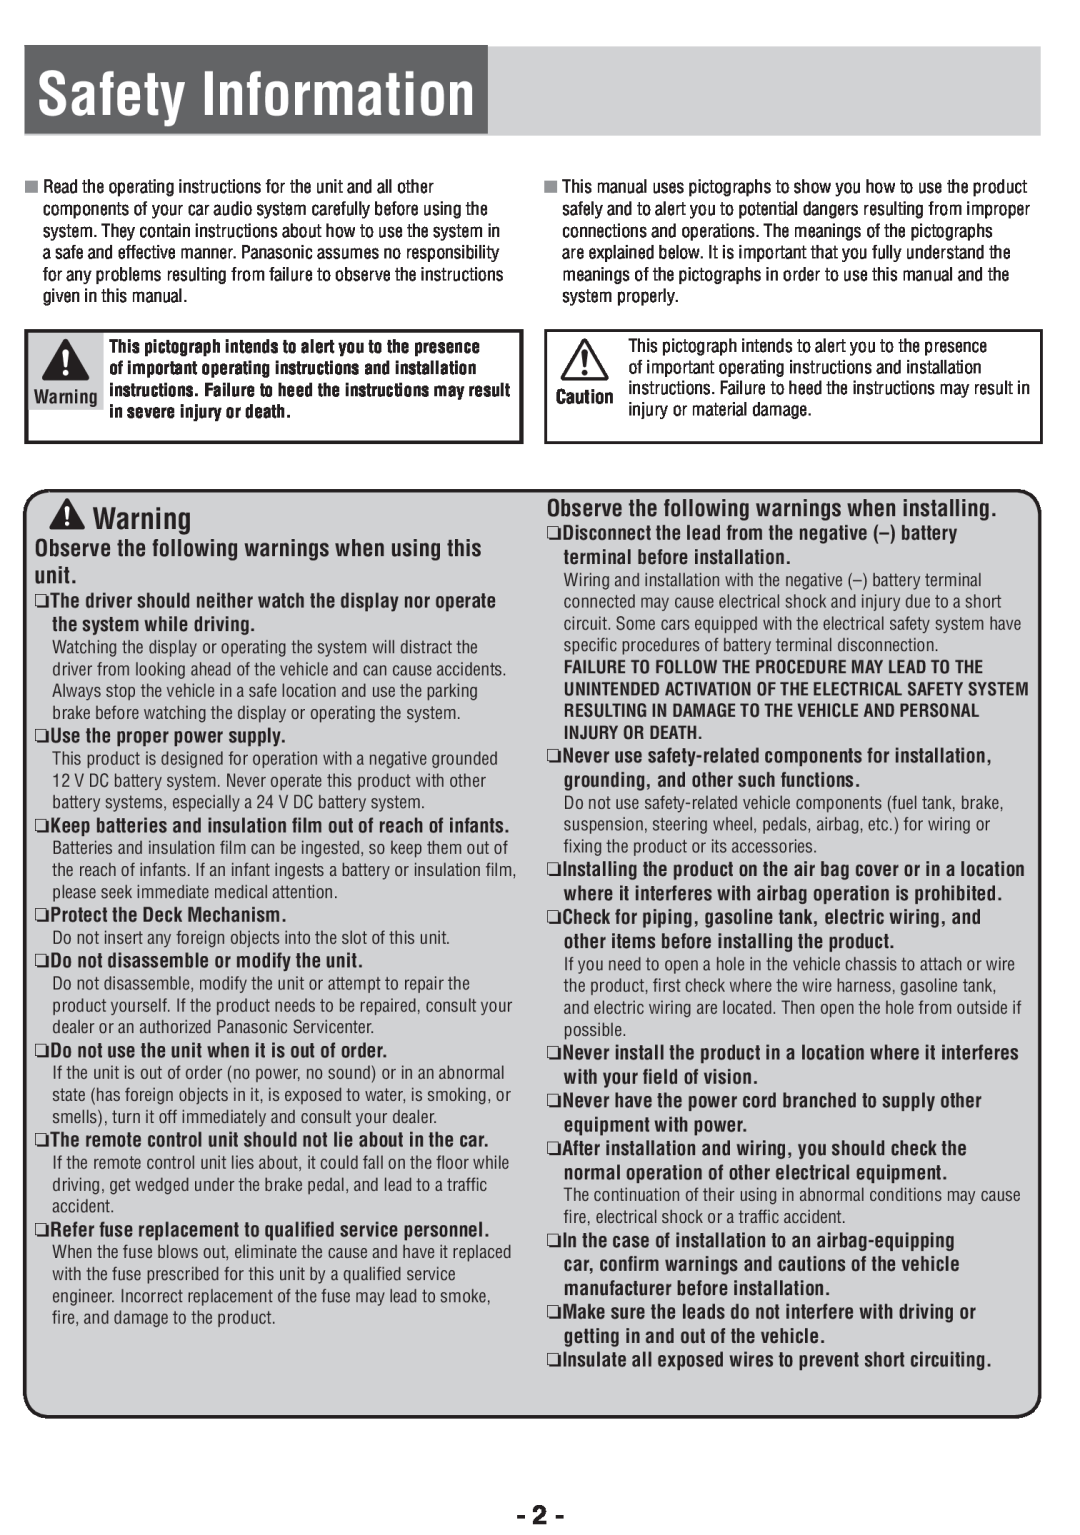 Panasonic CQ-RX400U Safety Information, Observe the following warnings when installing, RUse the proper power supply 